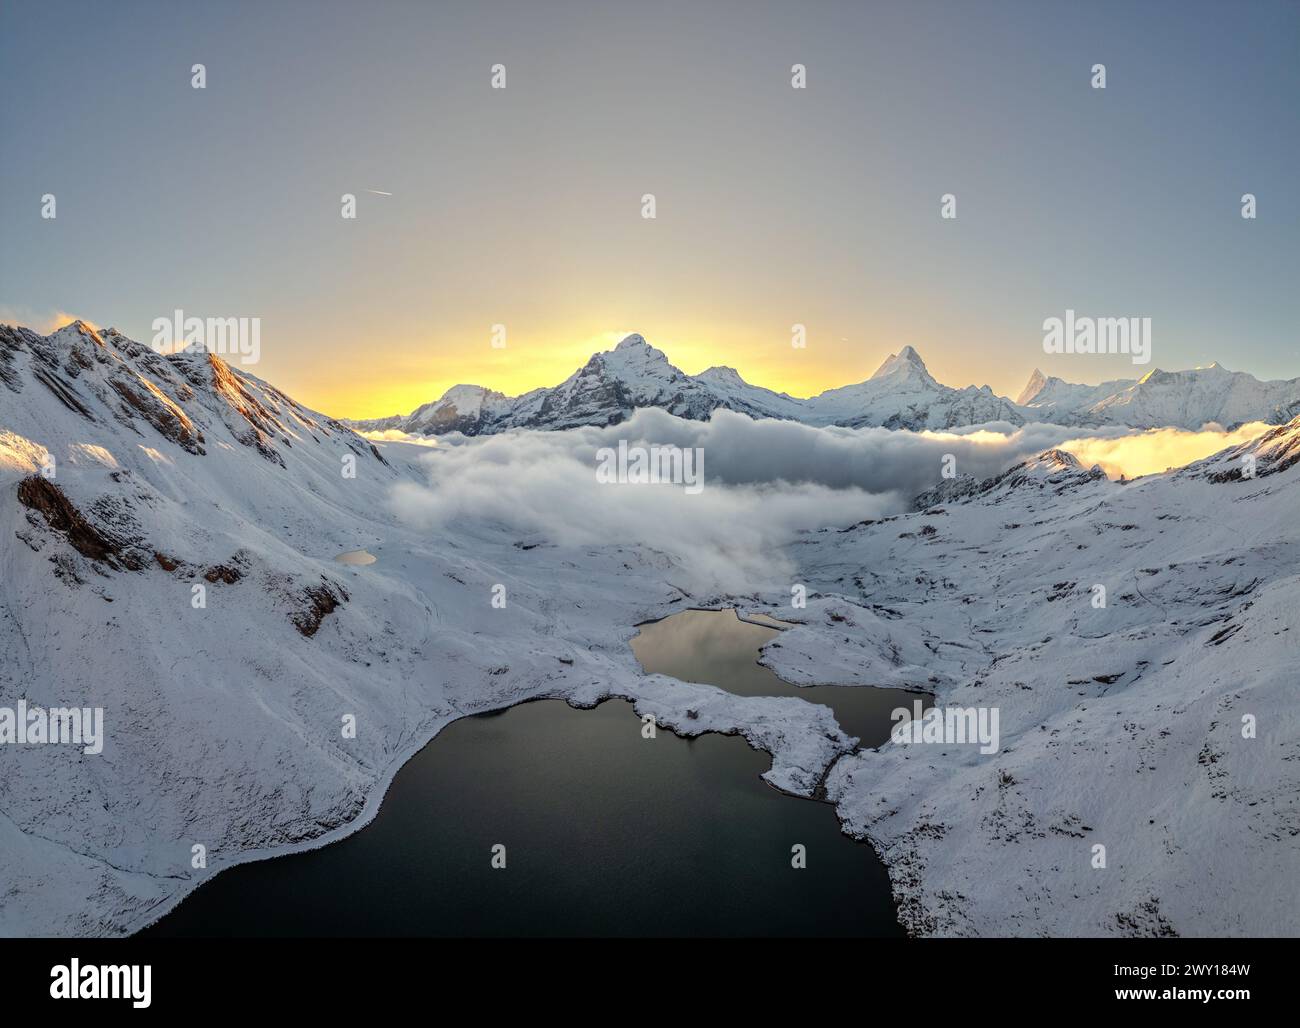 Lake Bachalpsee with Jungfrau, Eiger, and Monch Peaks after an early snow. Stock Photo